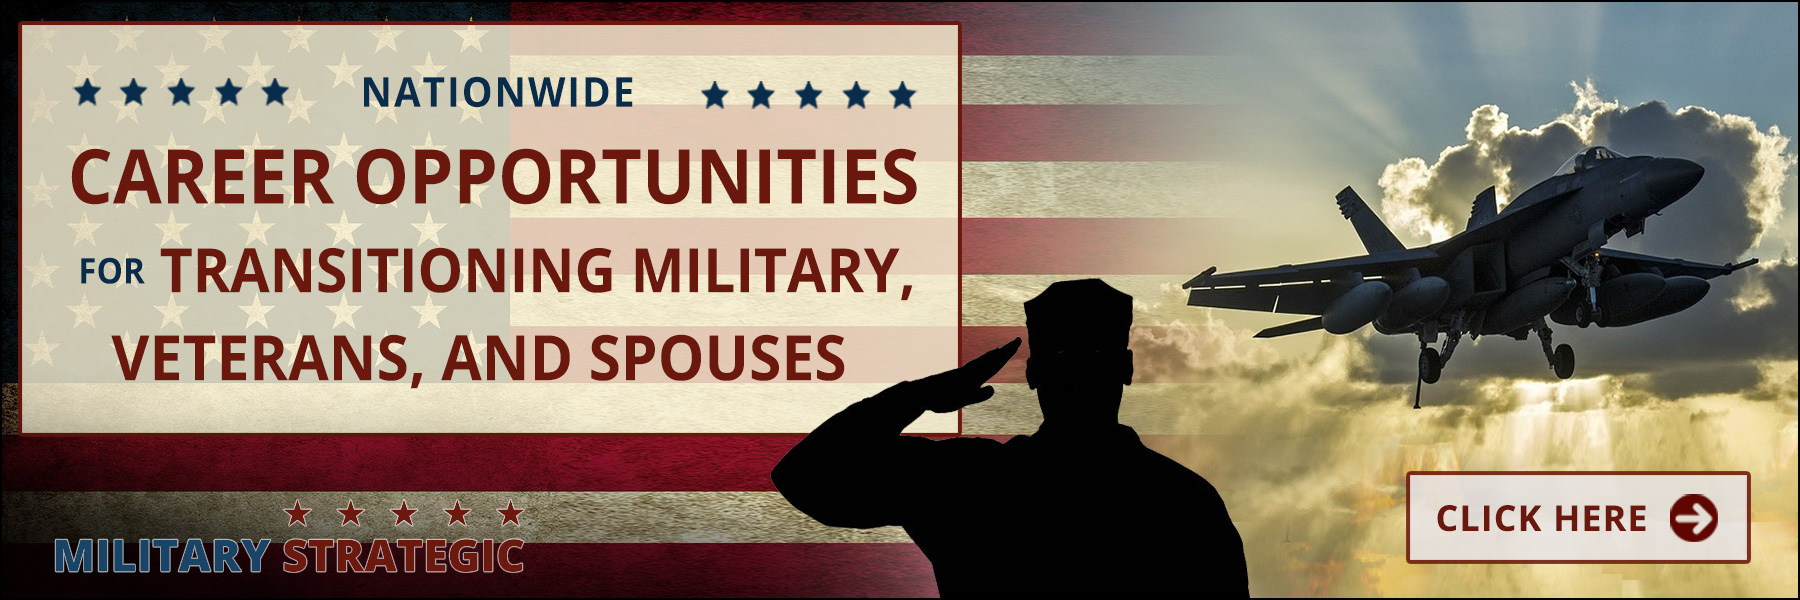 Military Opportunities